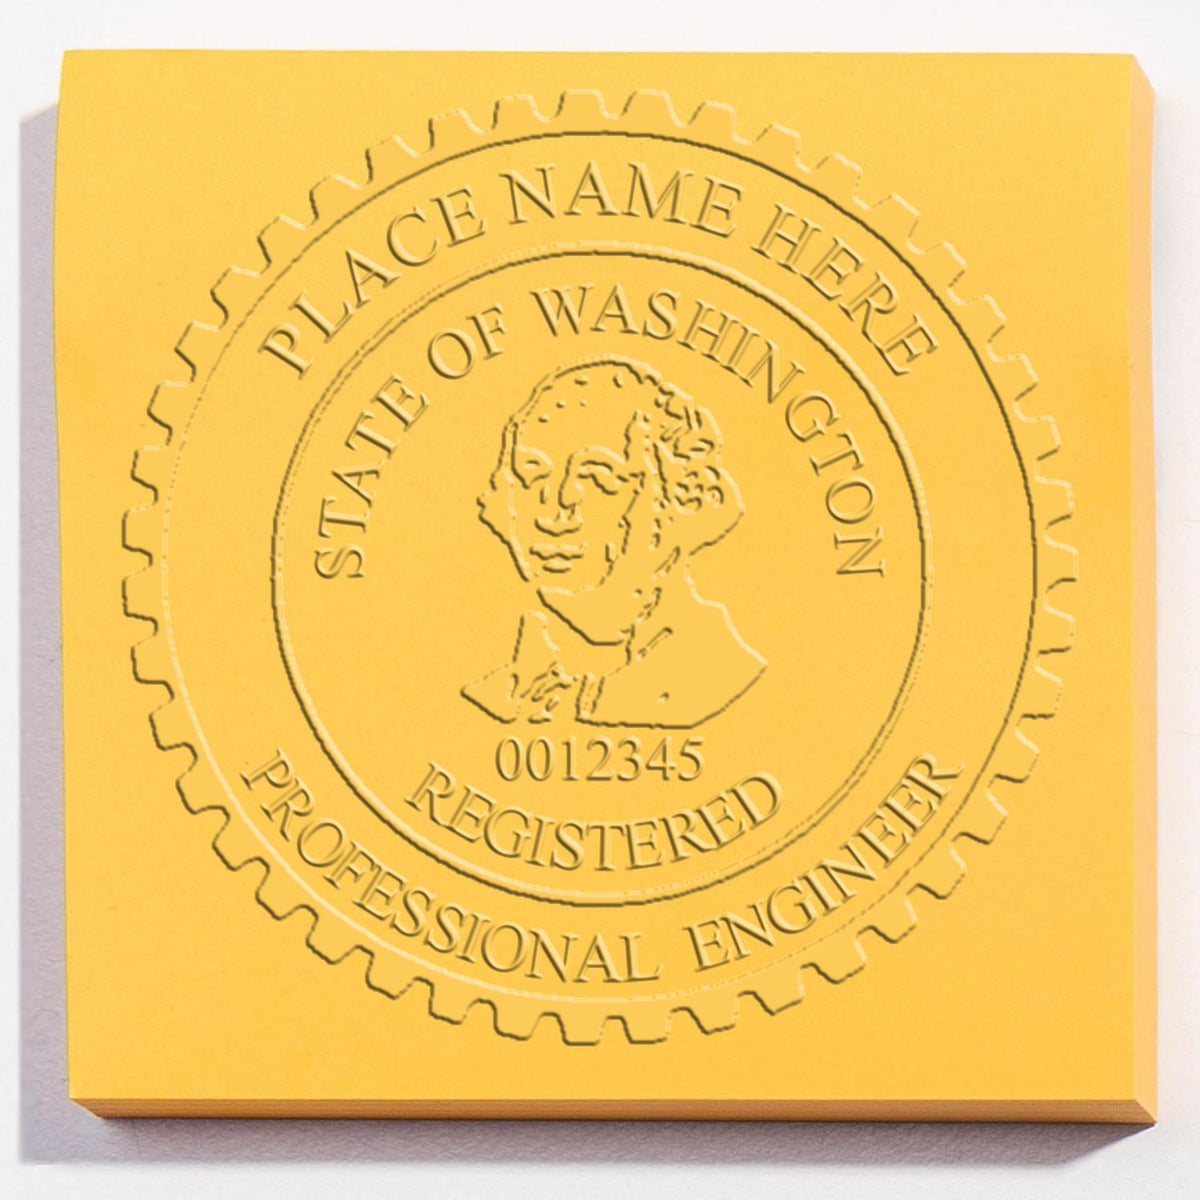 A photograph of the Soft Washington Professional Engineer Seal stamp impression reveals a vivid, professional image of the on paper.